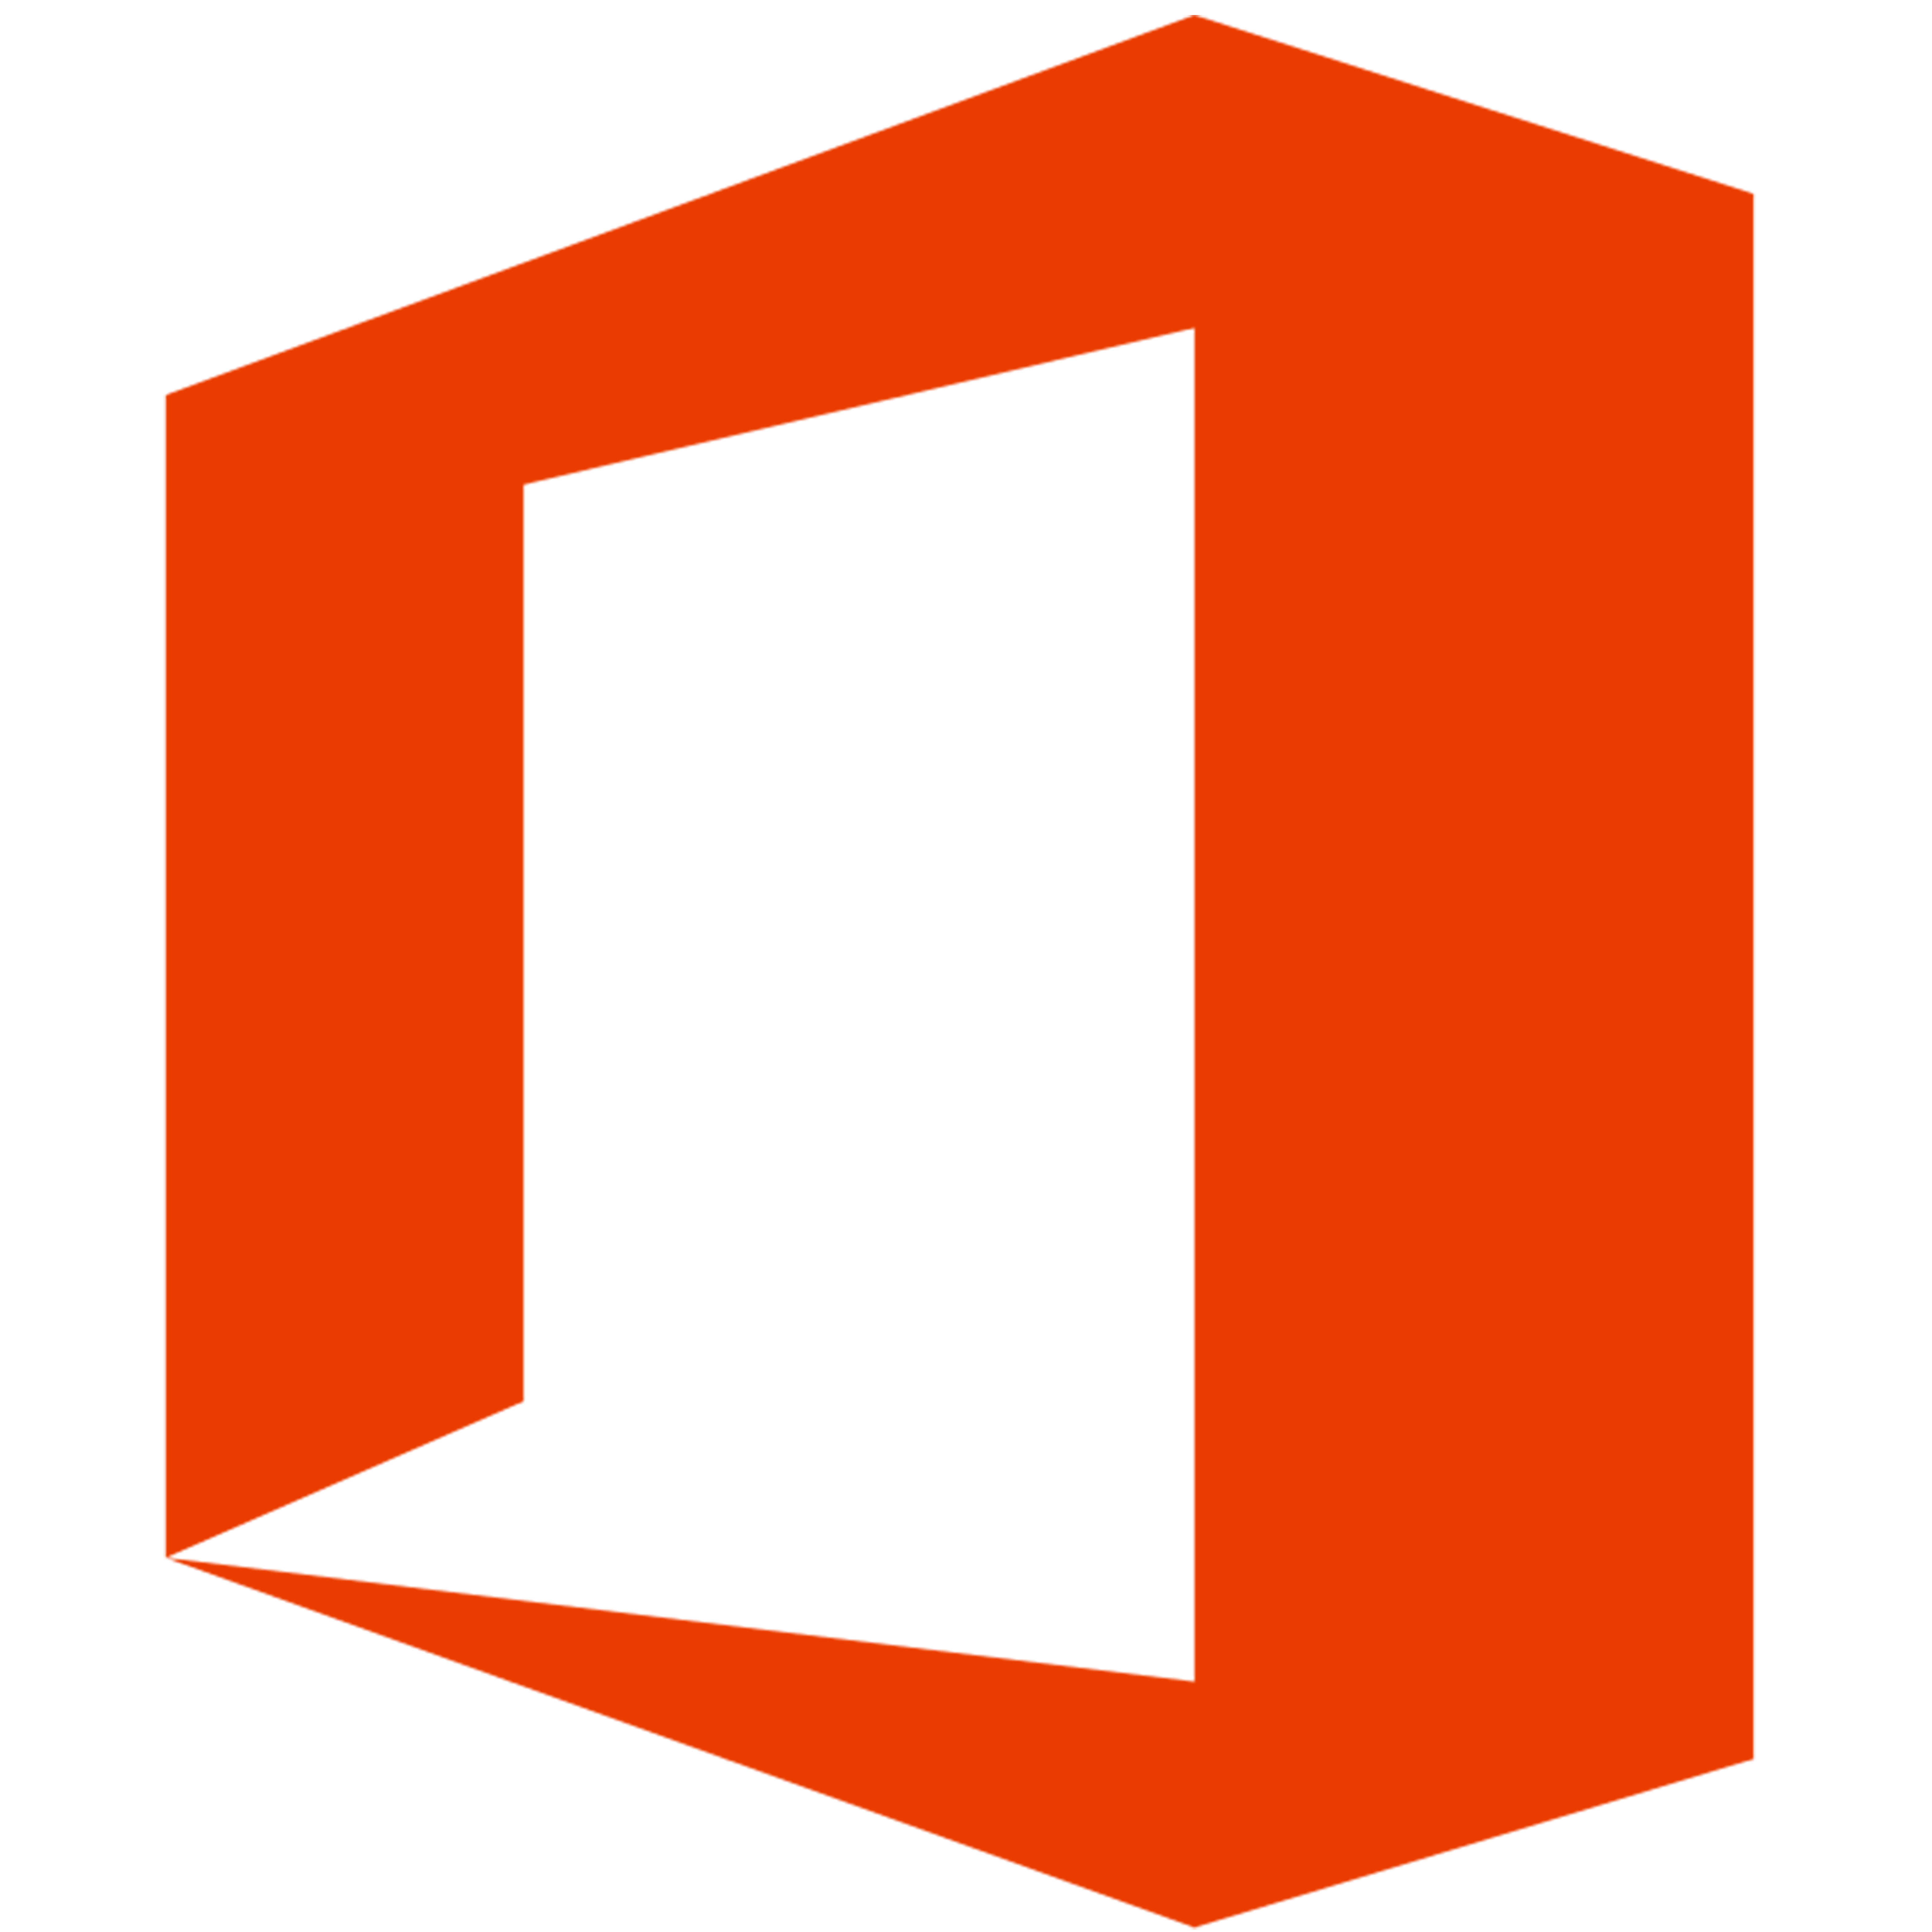 The icon representing Microsoft Office Suite